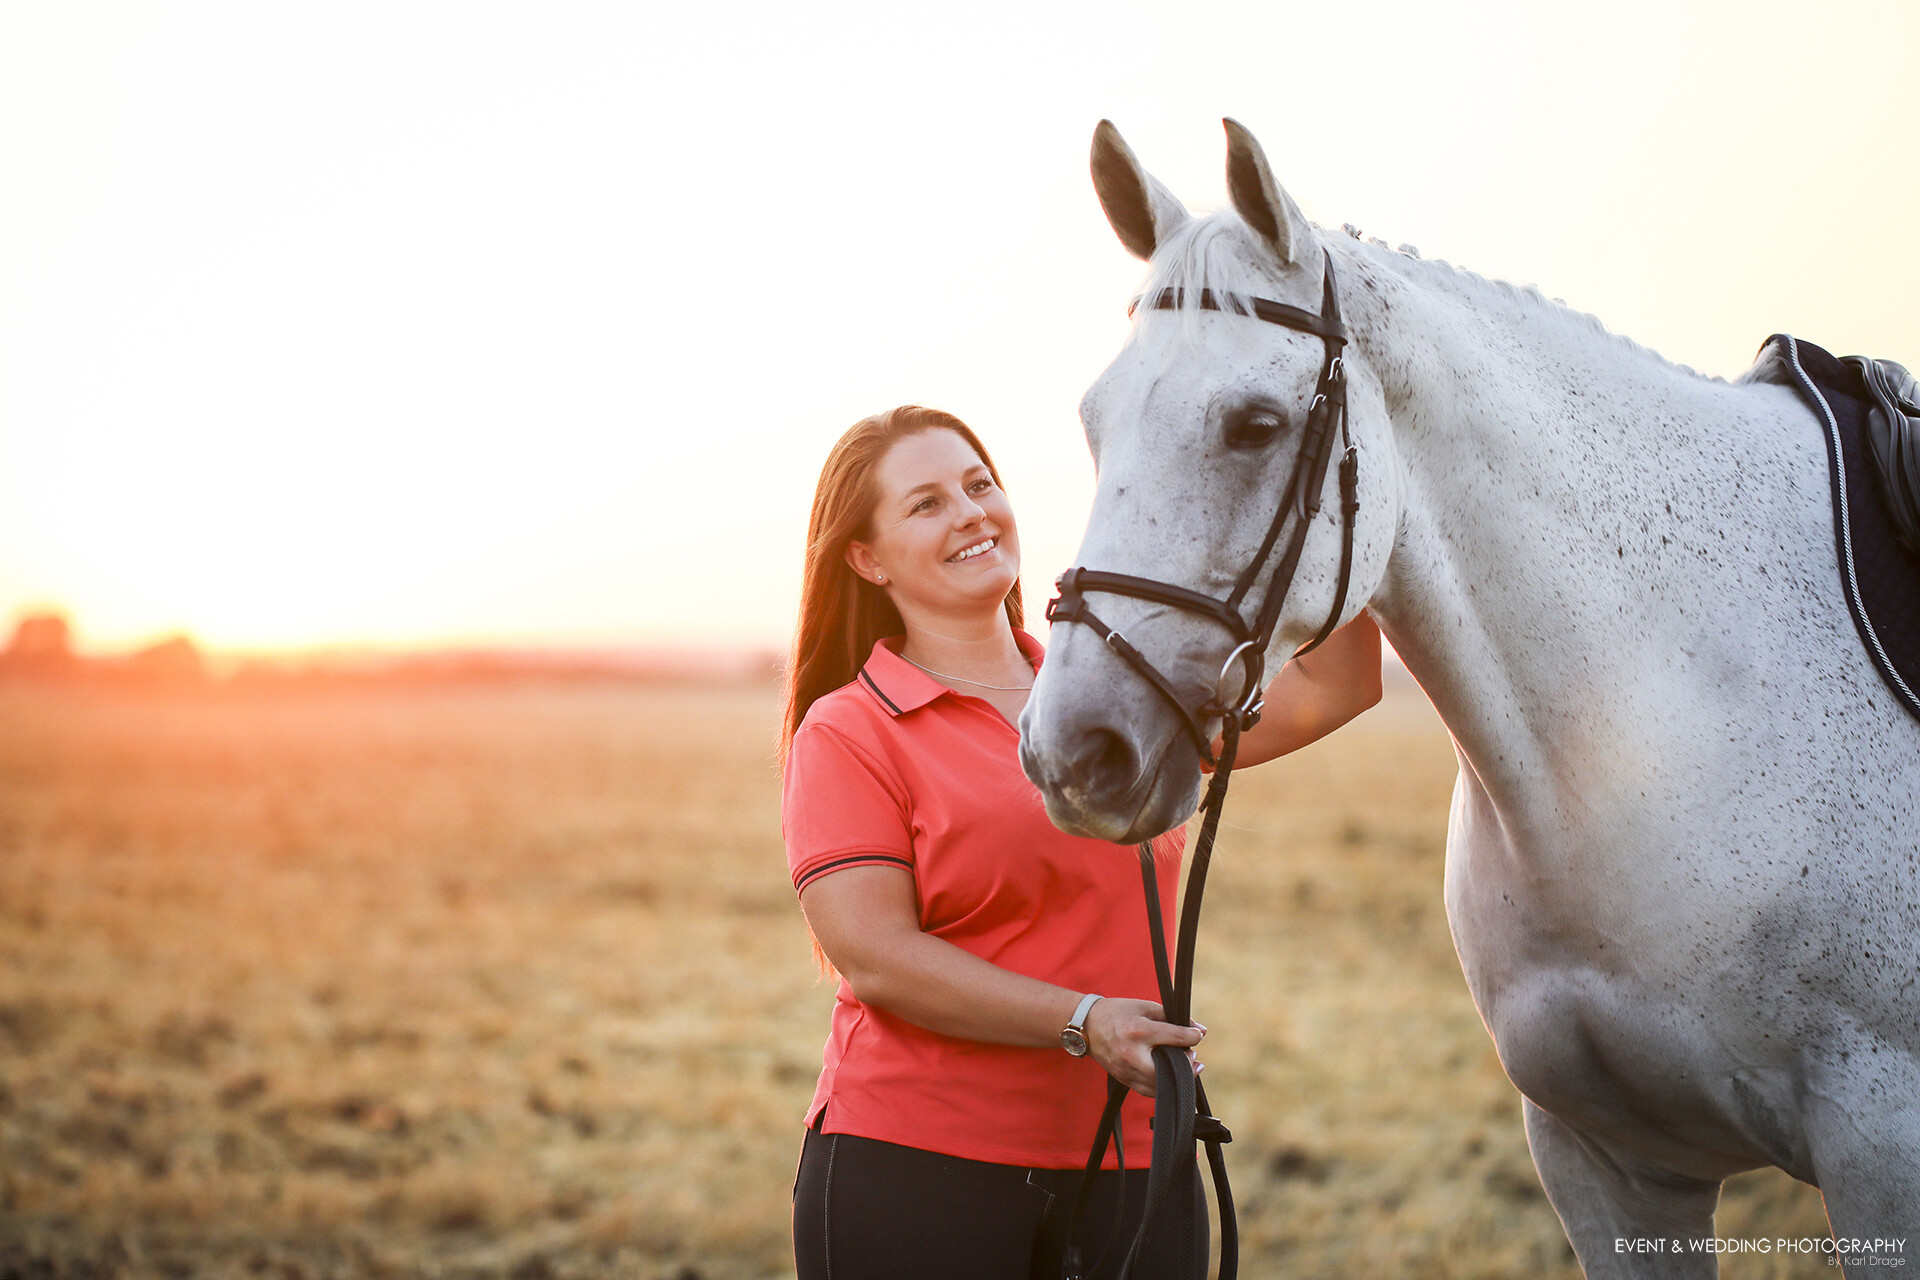 Backlit shot of a dismounted female rider patting her horse at sunset